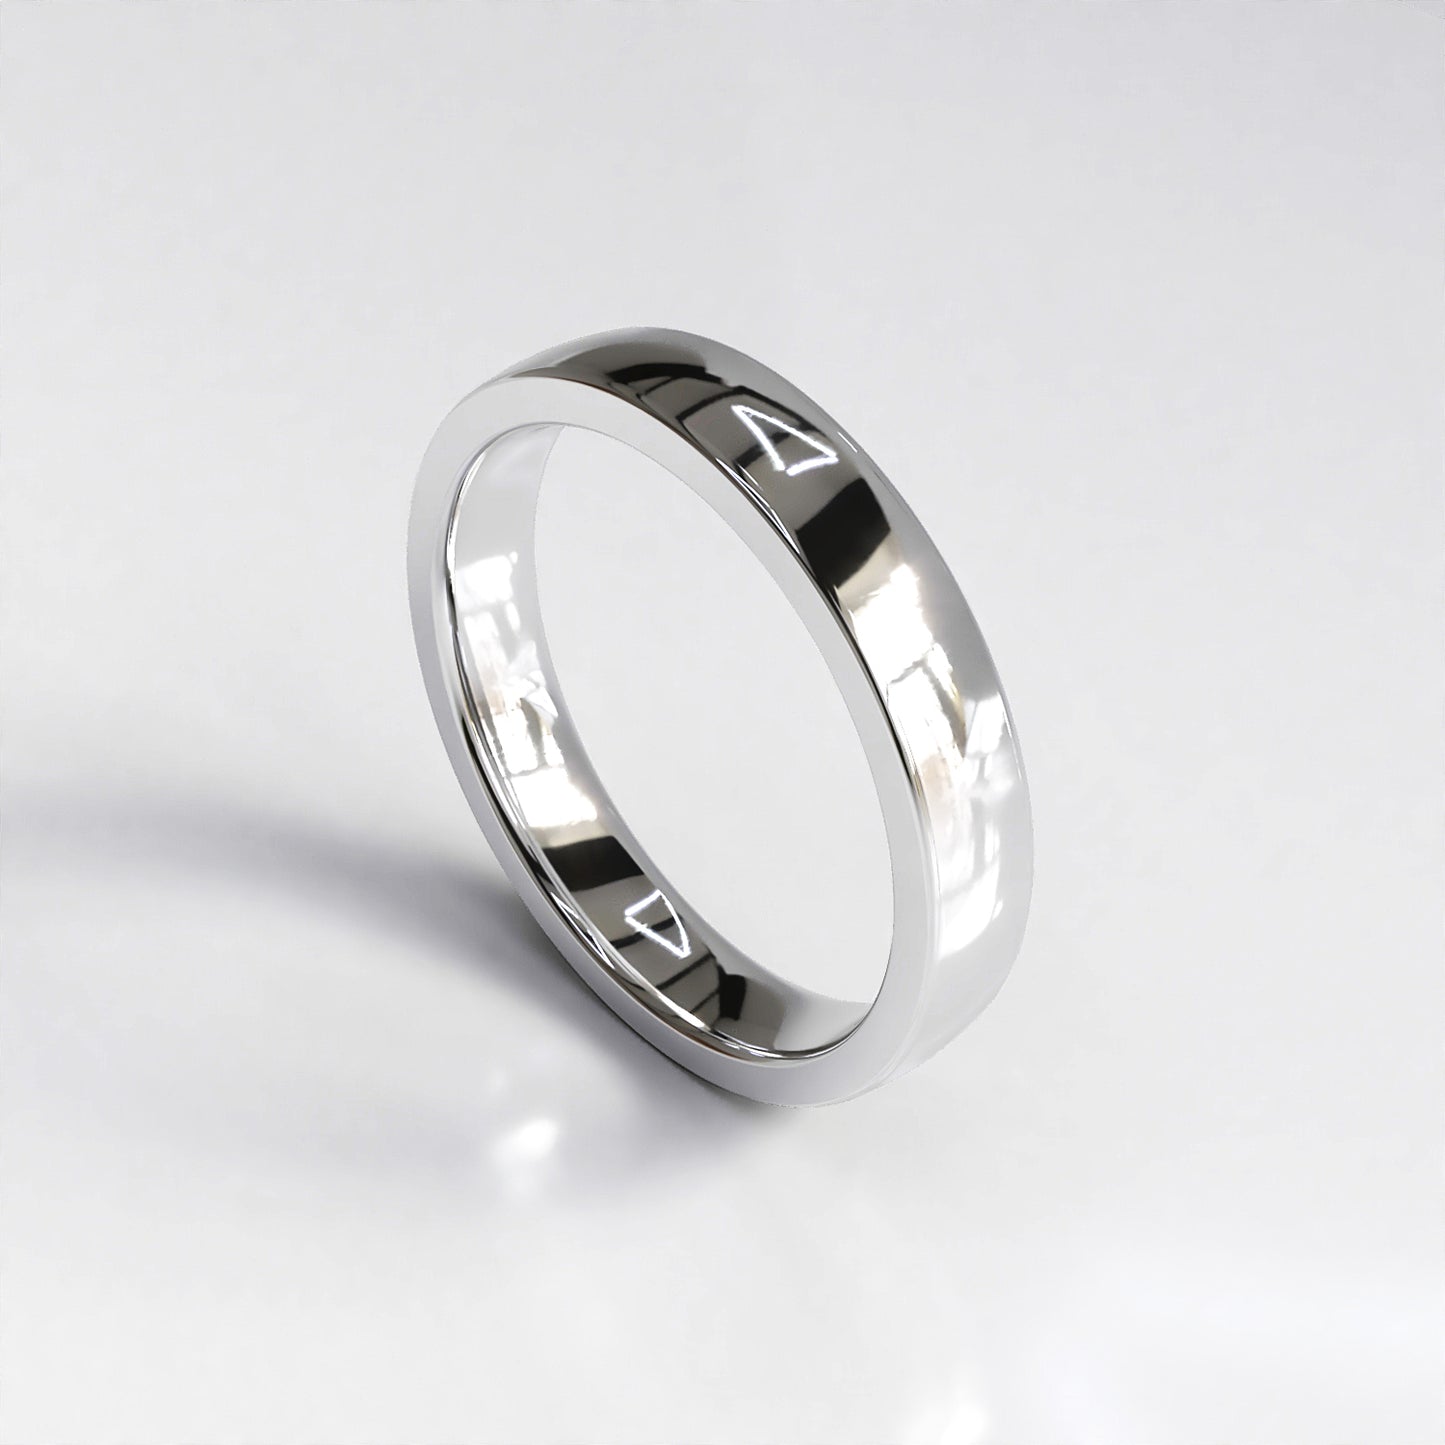 Catherine: Bespoke 9ct White Gold Fitted Wedding Band.